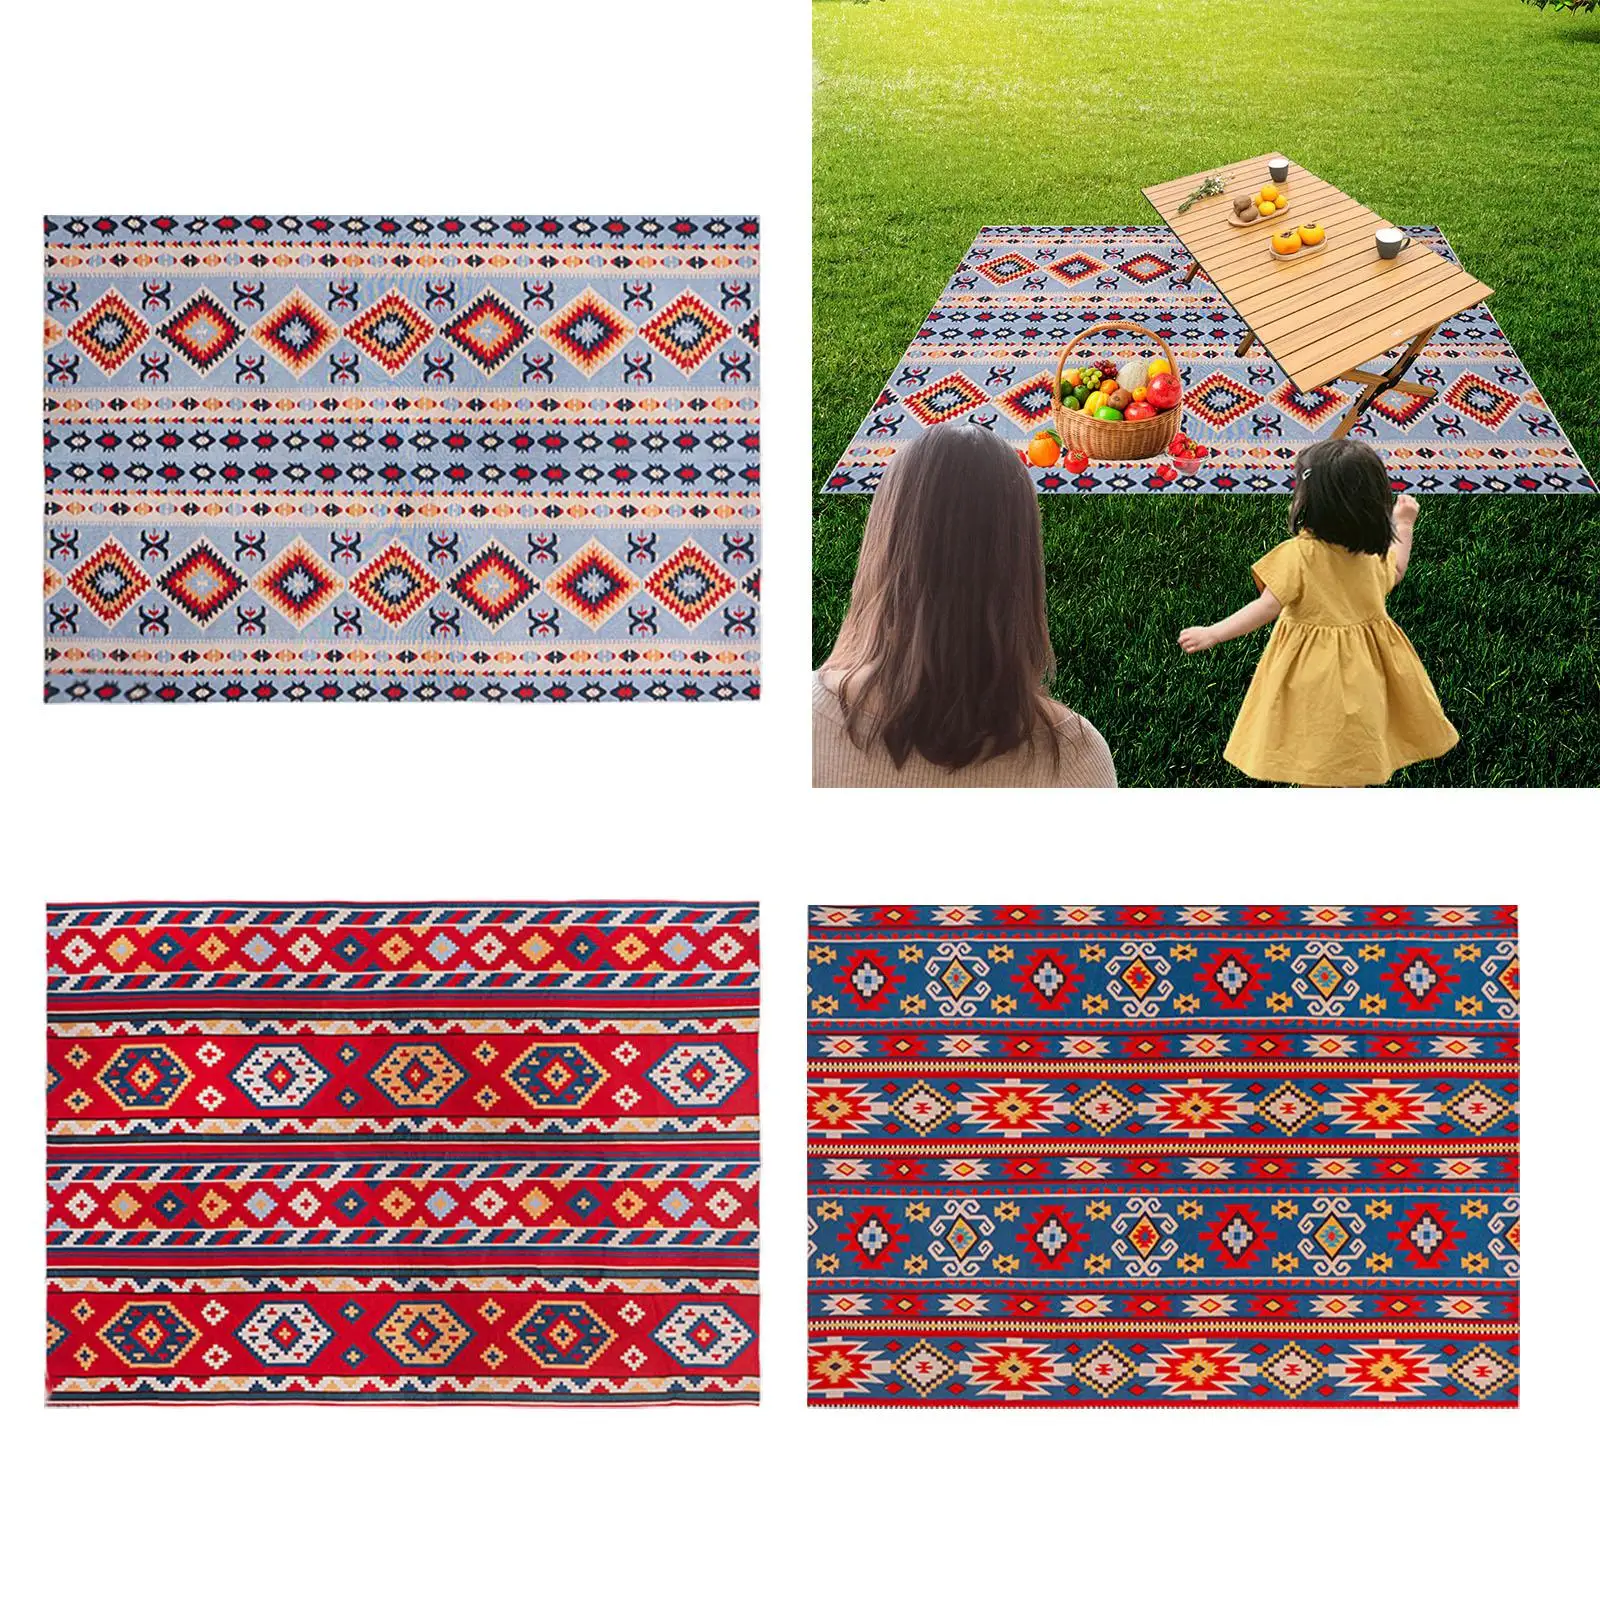 Large Picnic Outdoor Blanket Protective Moistureproof Outdoor Outdoor Mat for Festival Grass Sporting Events